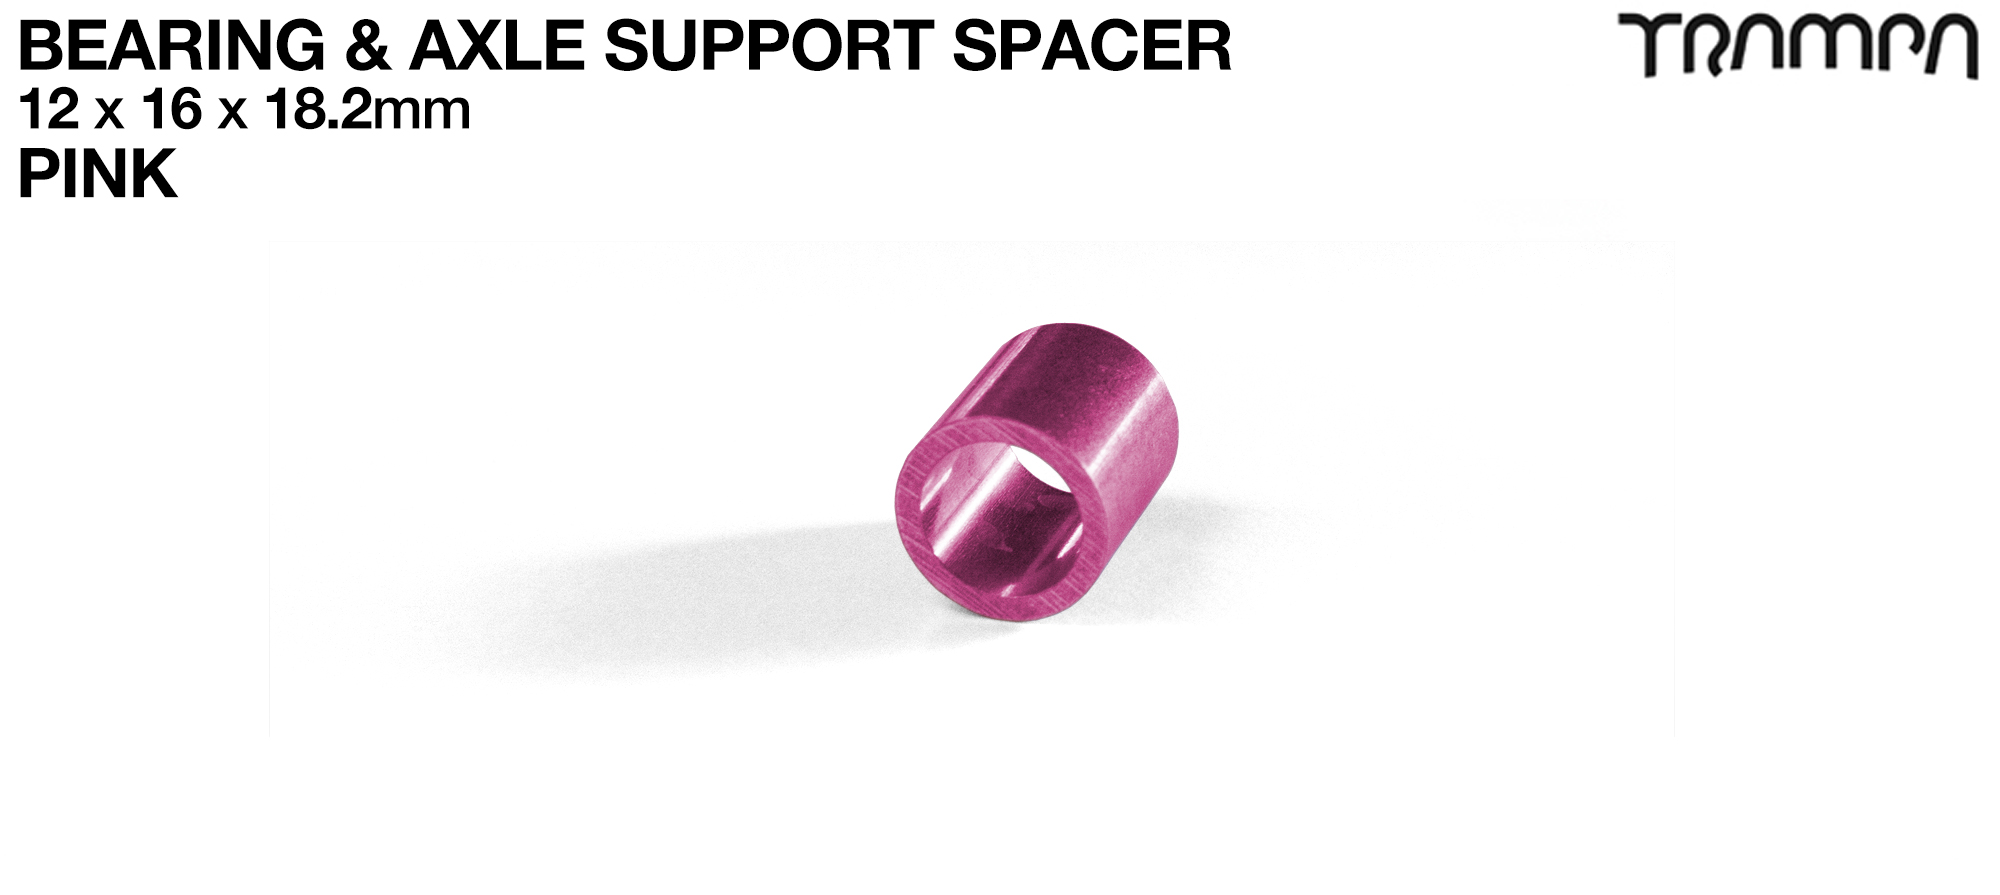 18.2mm Wheel Support Axle Spacers - PINK x2